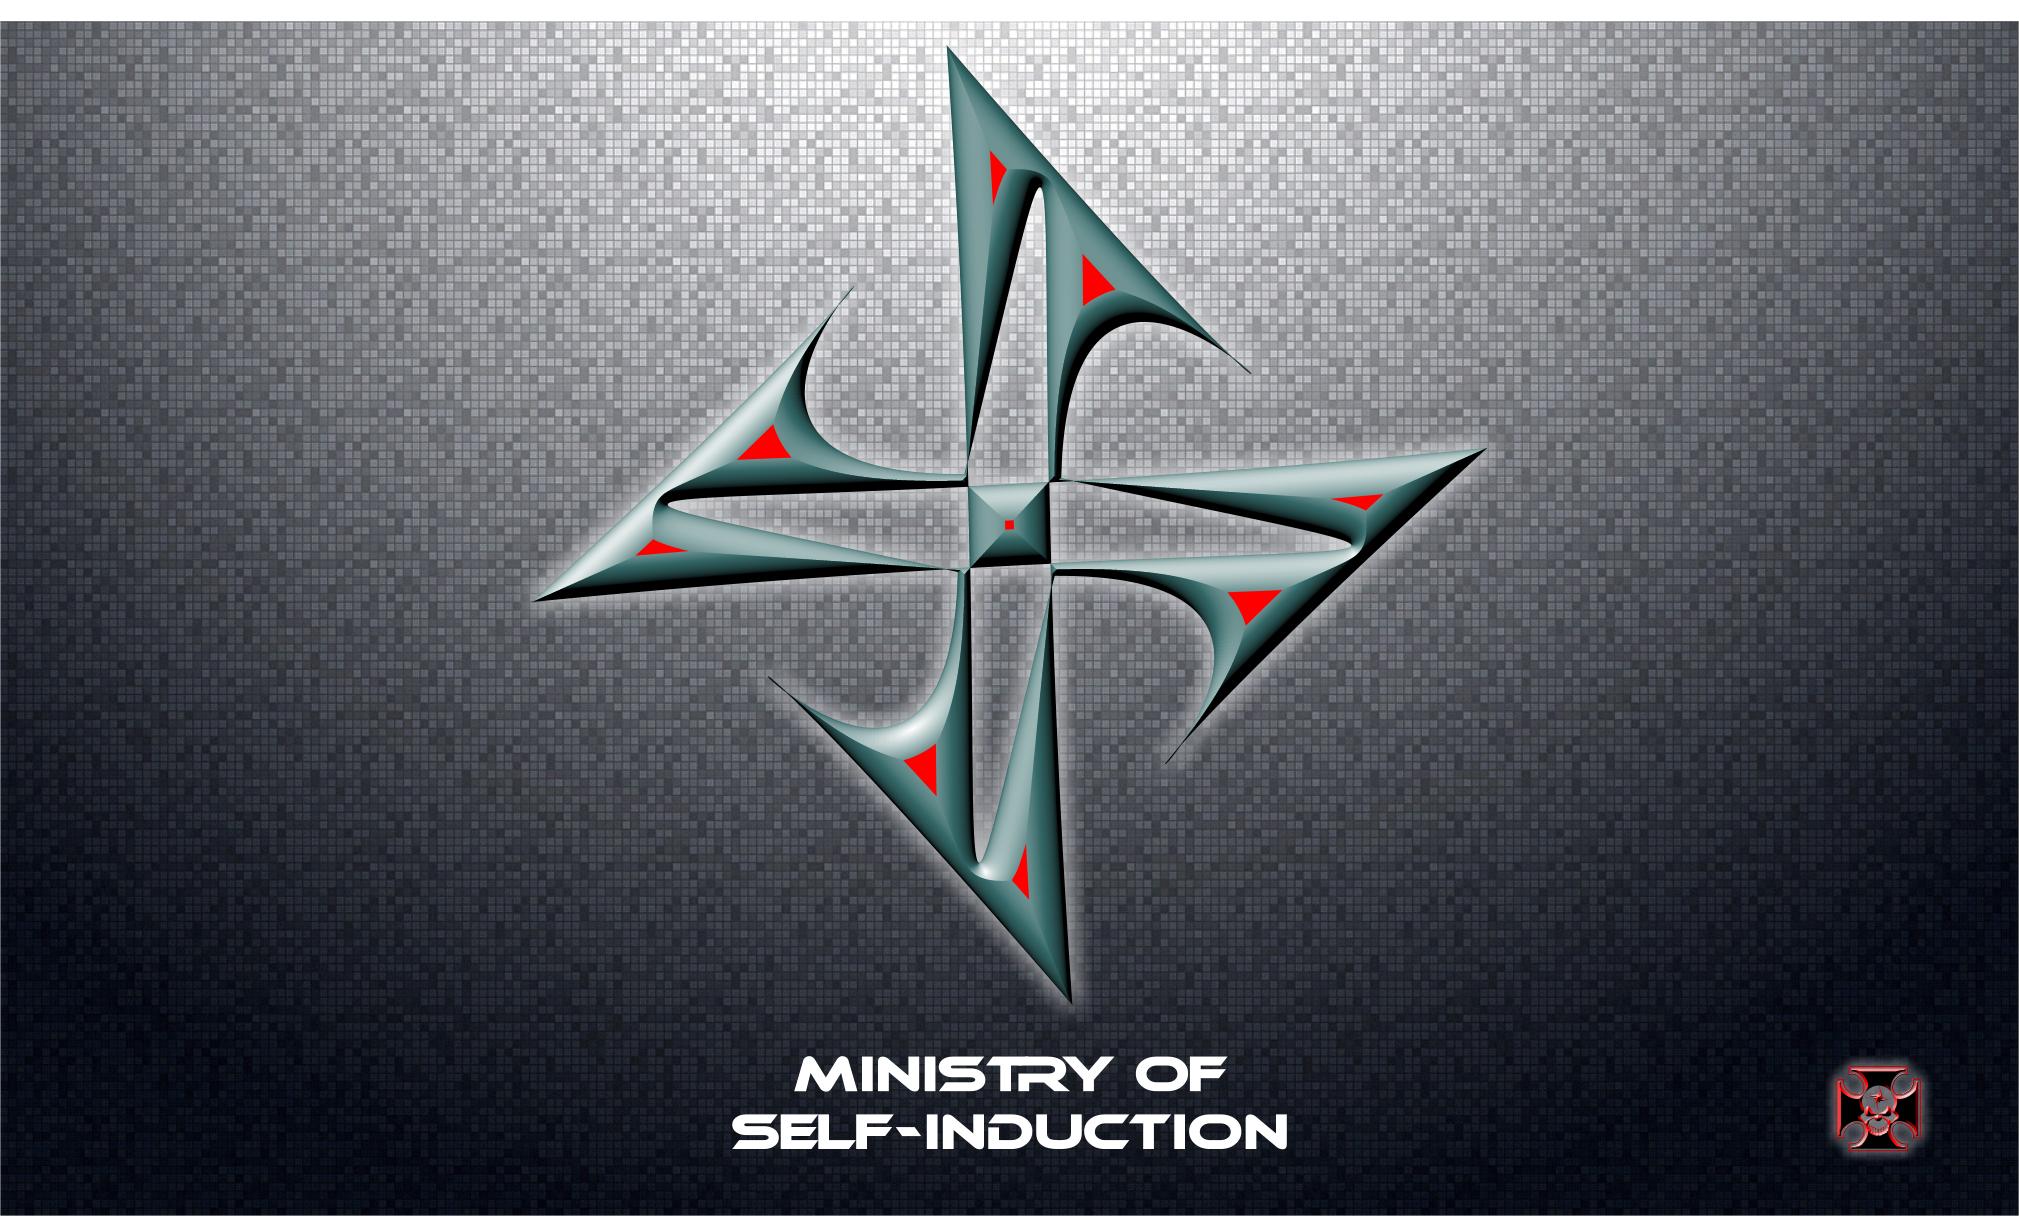 Ministry of Self-Induction: A mesmerizing dark and industrial artwork by NervisGrafix.